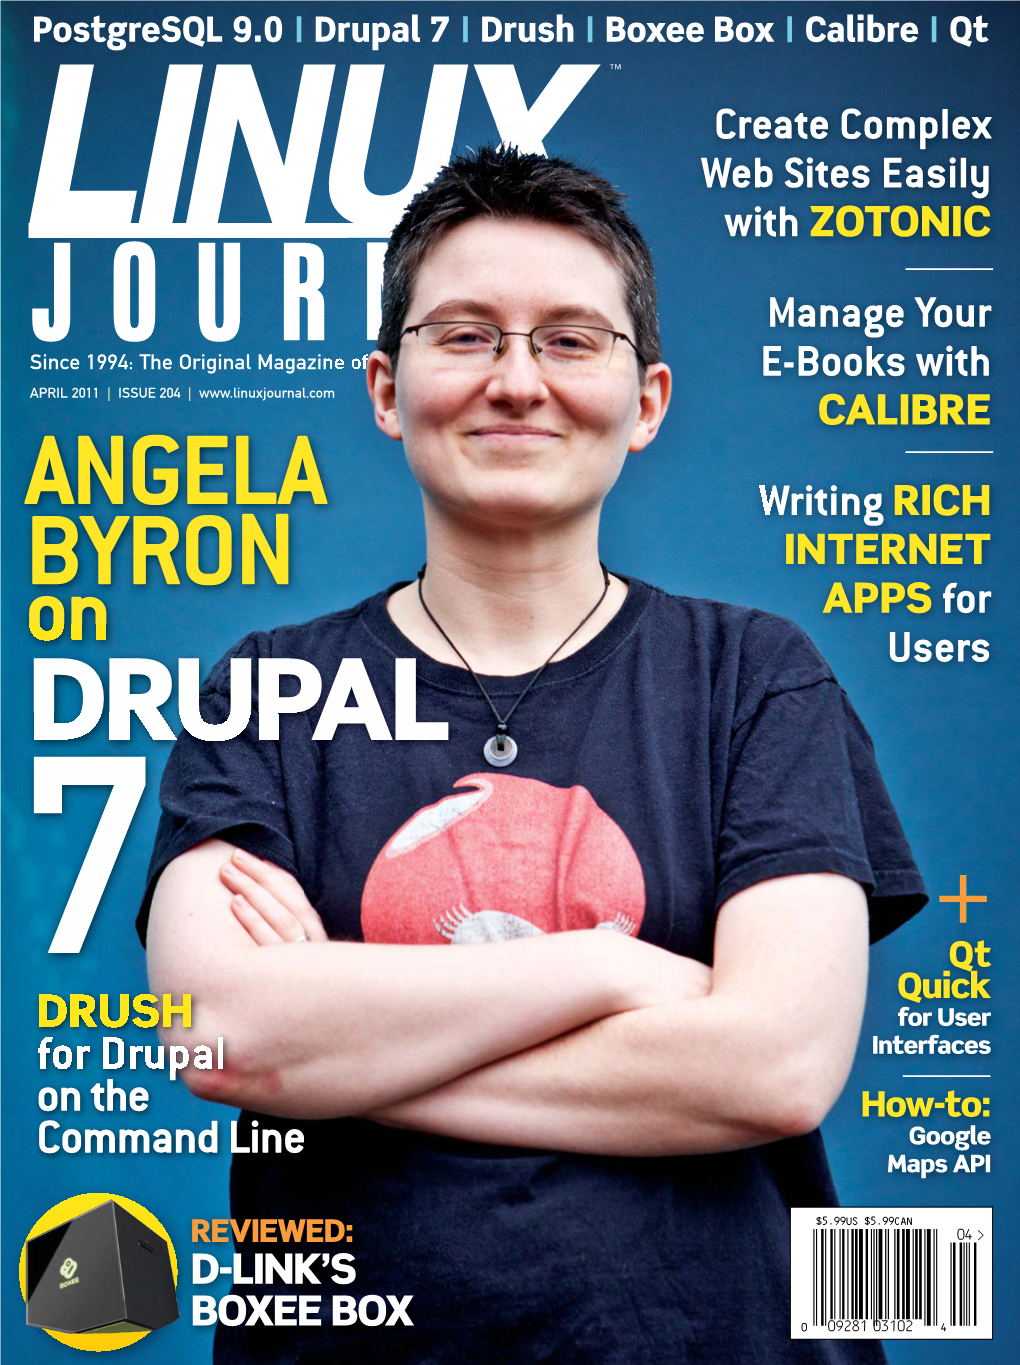 LINUX JOURNAL (ISSN 1075-3583) (USPS 12854) Is Published Monthly by Belltown Media, Inc., 2121 Sage Road, Ste